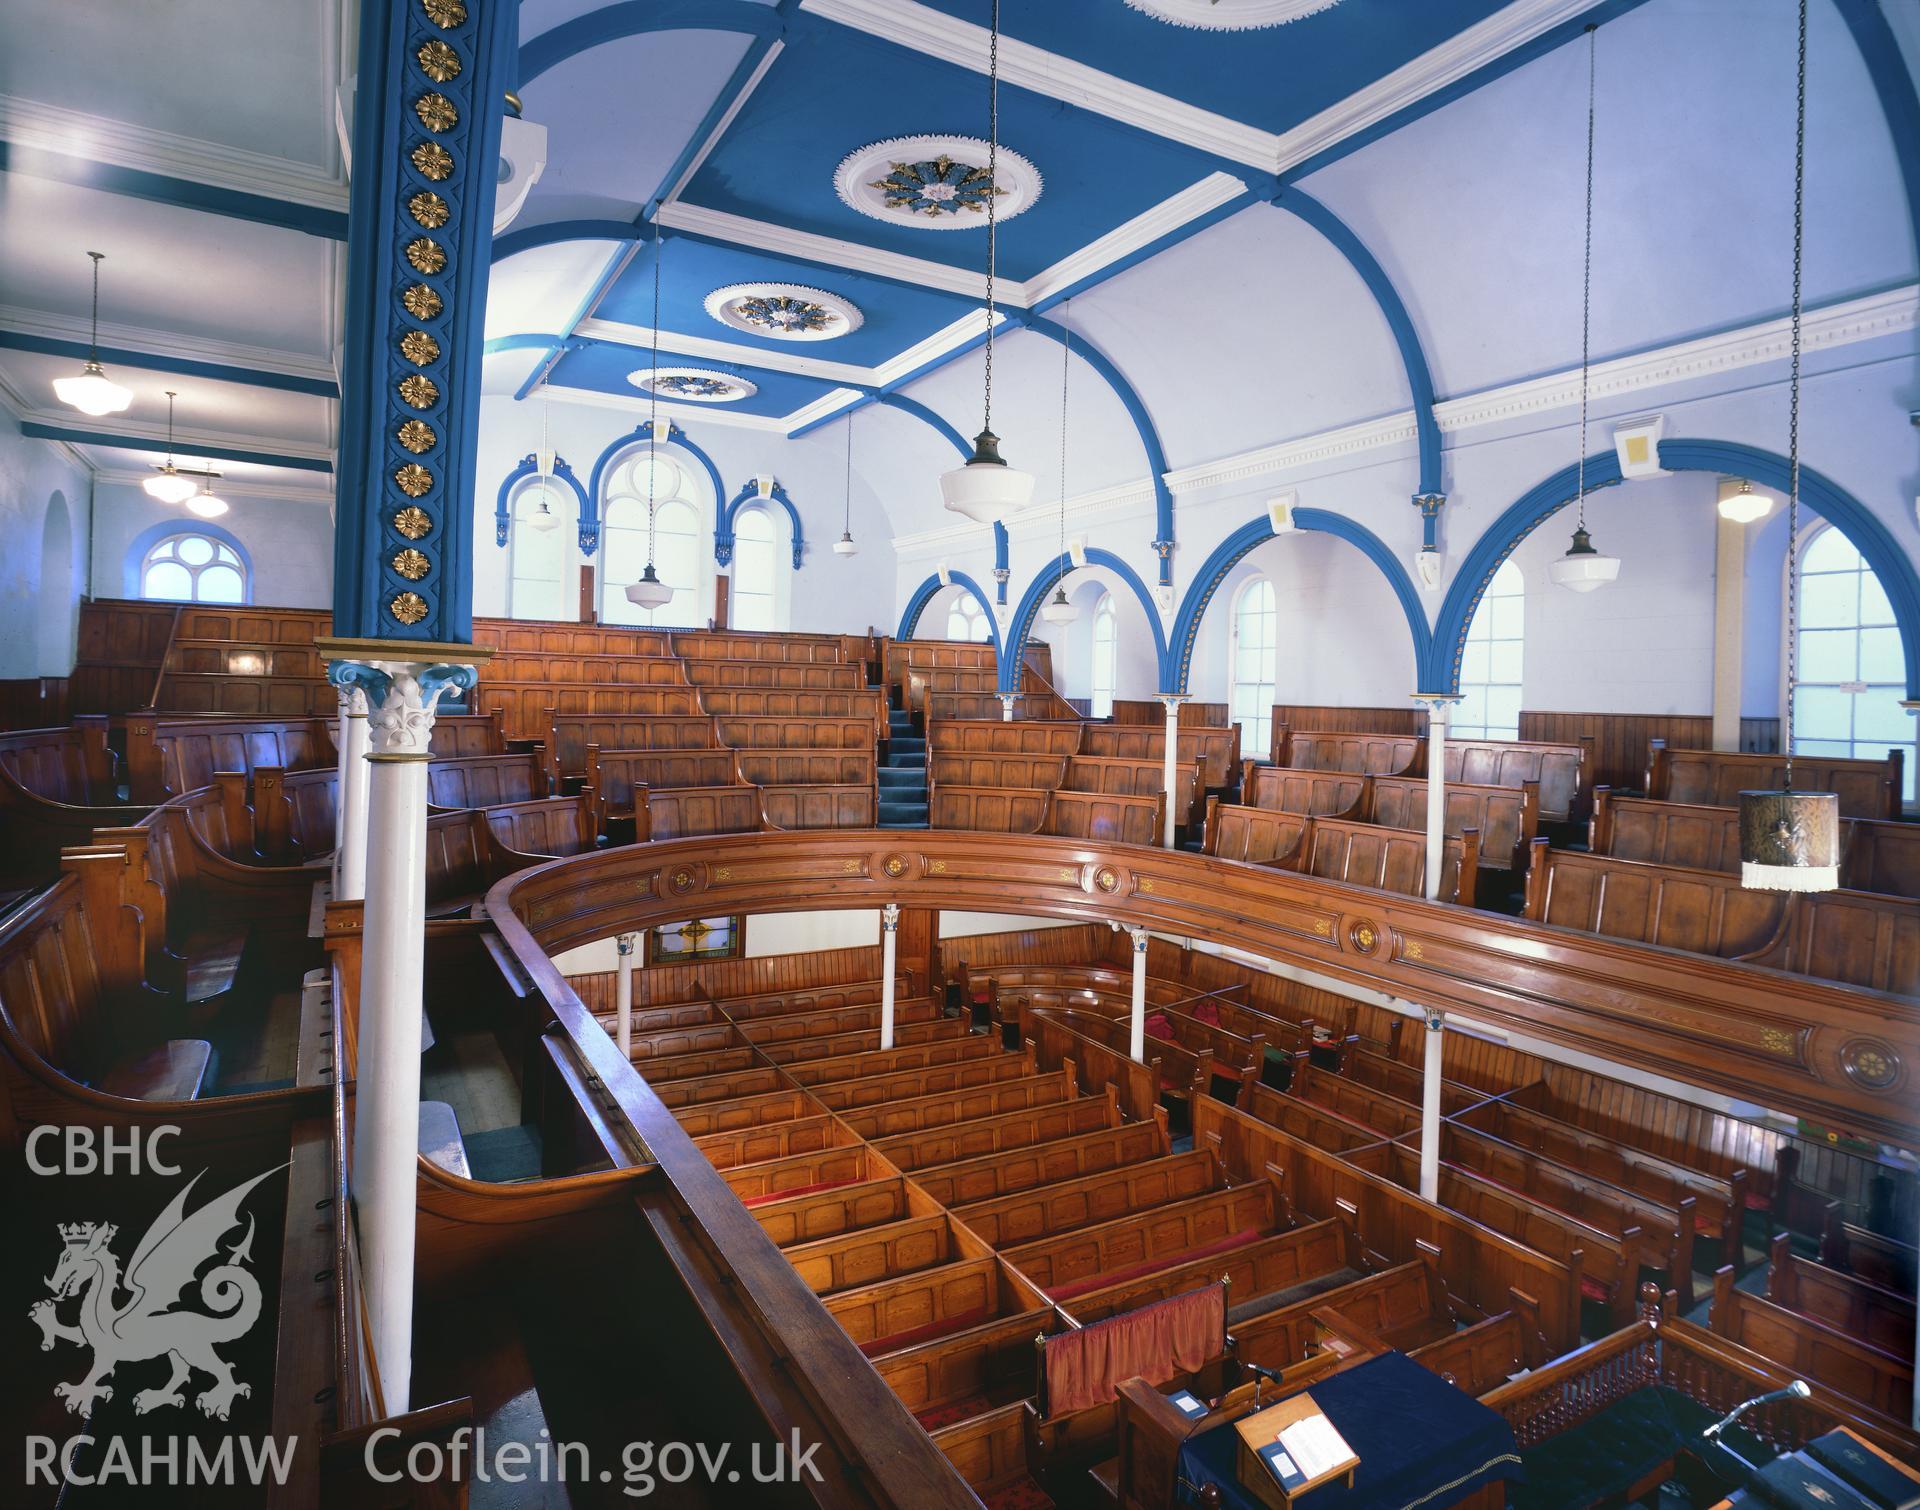 RCAHMW colour transparency of an interior view of Capel Seion, Baker Street, Aberystwyth.